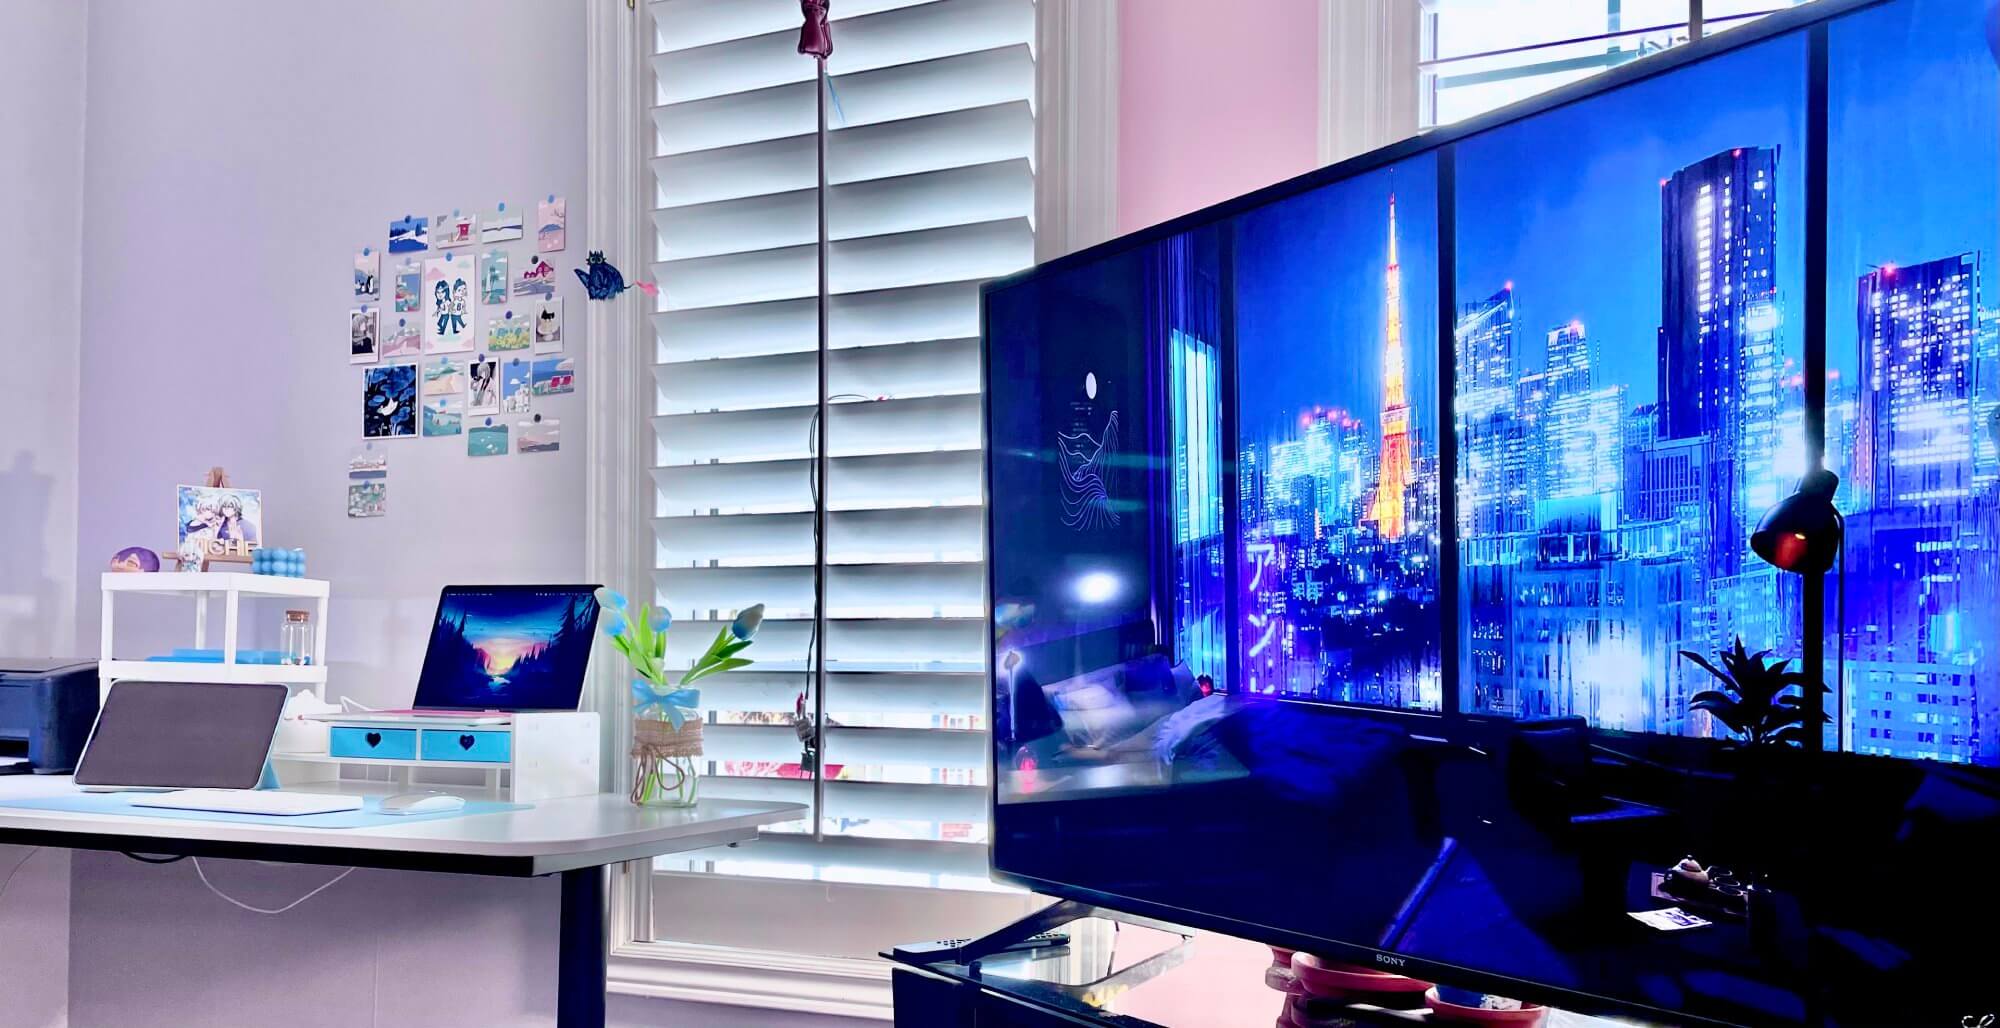 A 55″ Sony Bravia TV and a blue-themed workspace